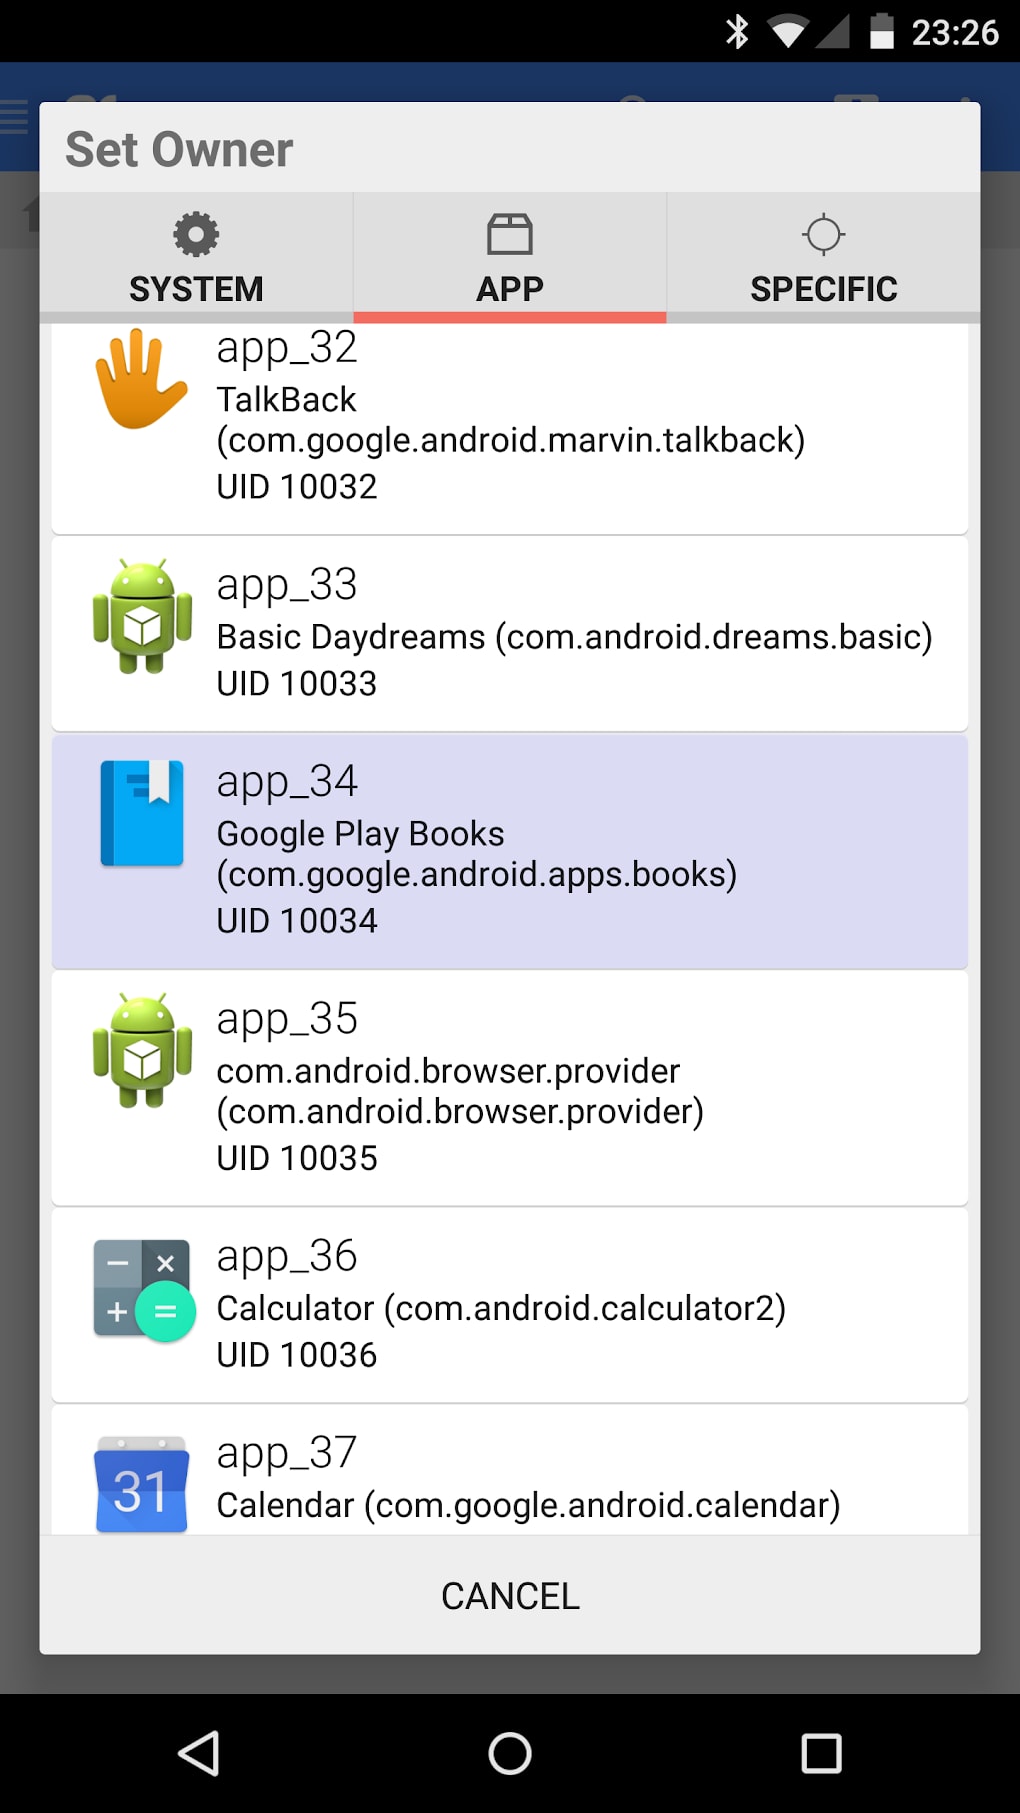 Root Android приложение. Com.Android.browser. Com.Android.Dreams.Basic. Com.Google.Android.Marvin.Talkback.